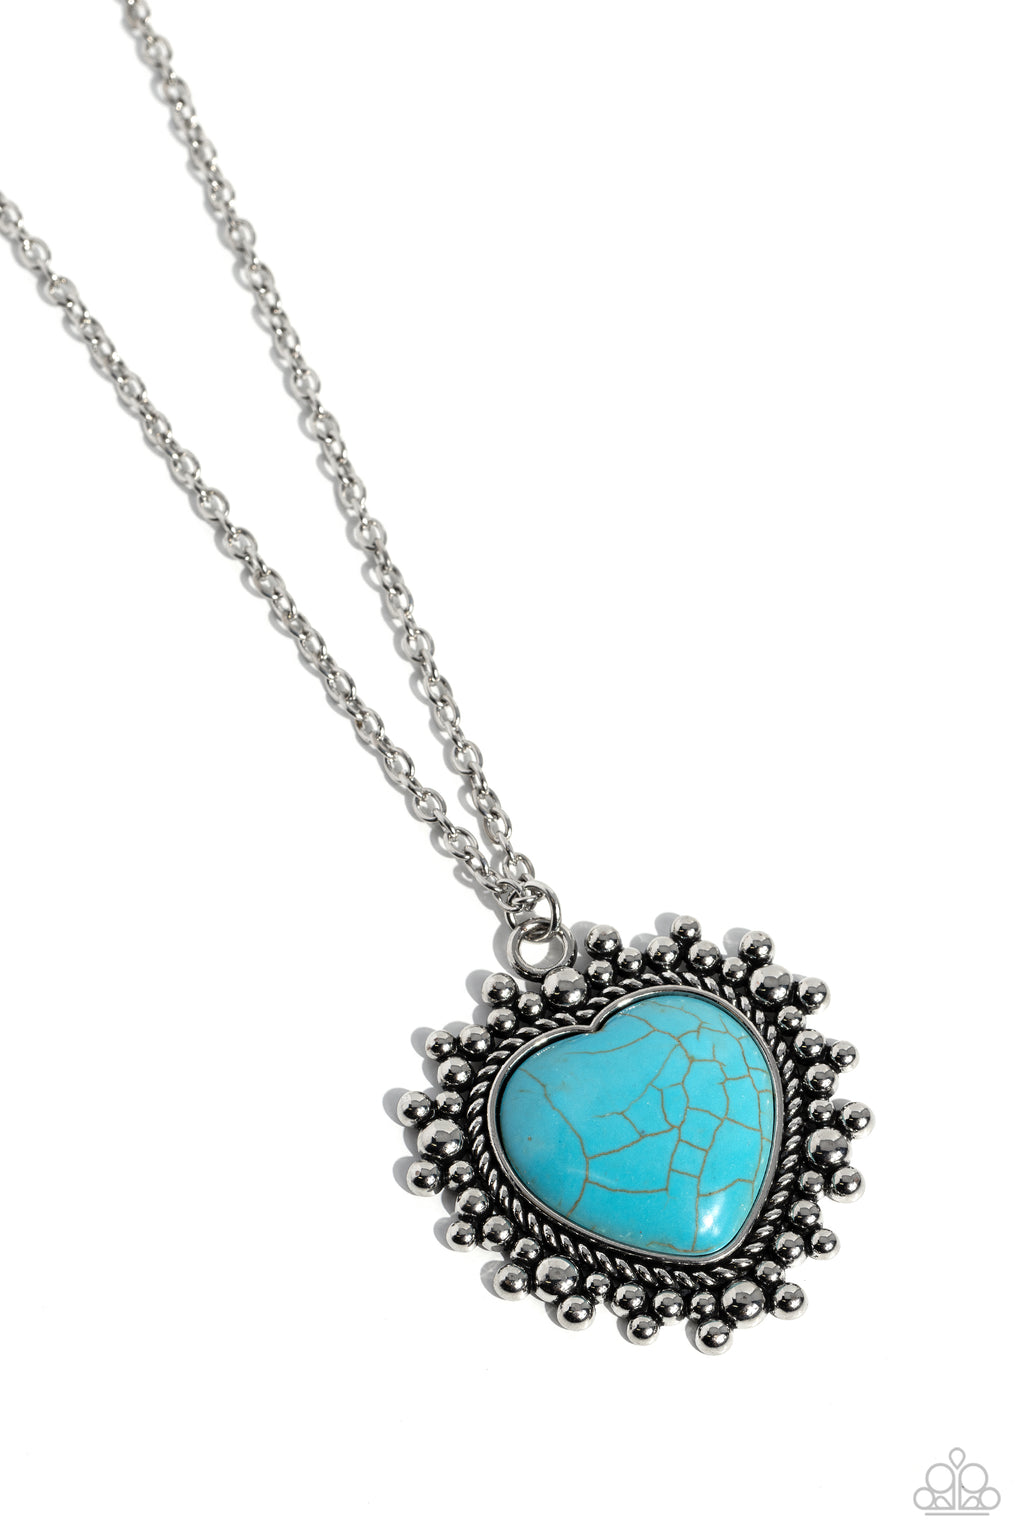 Cheering Section - Blue - Paparazzi Necklace